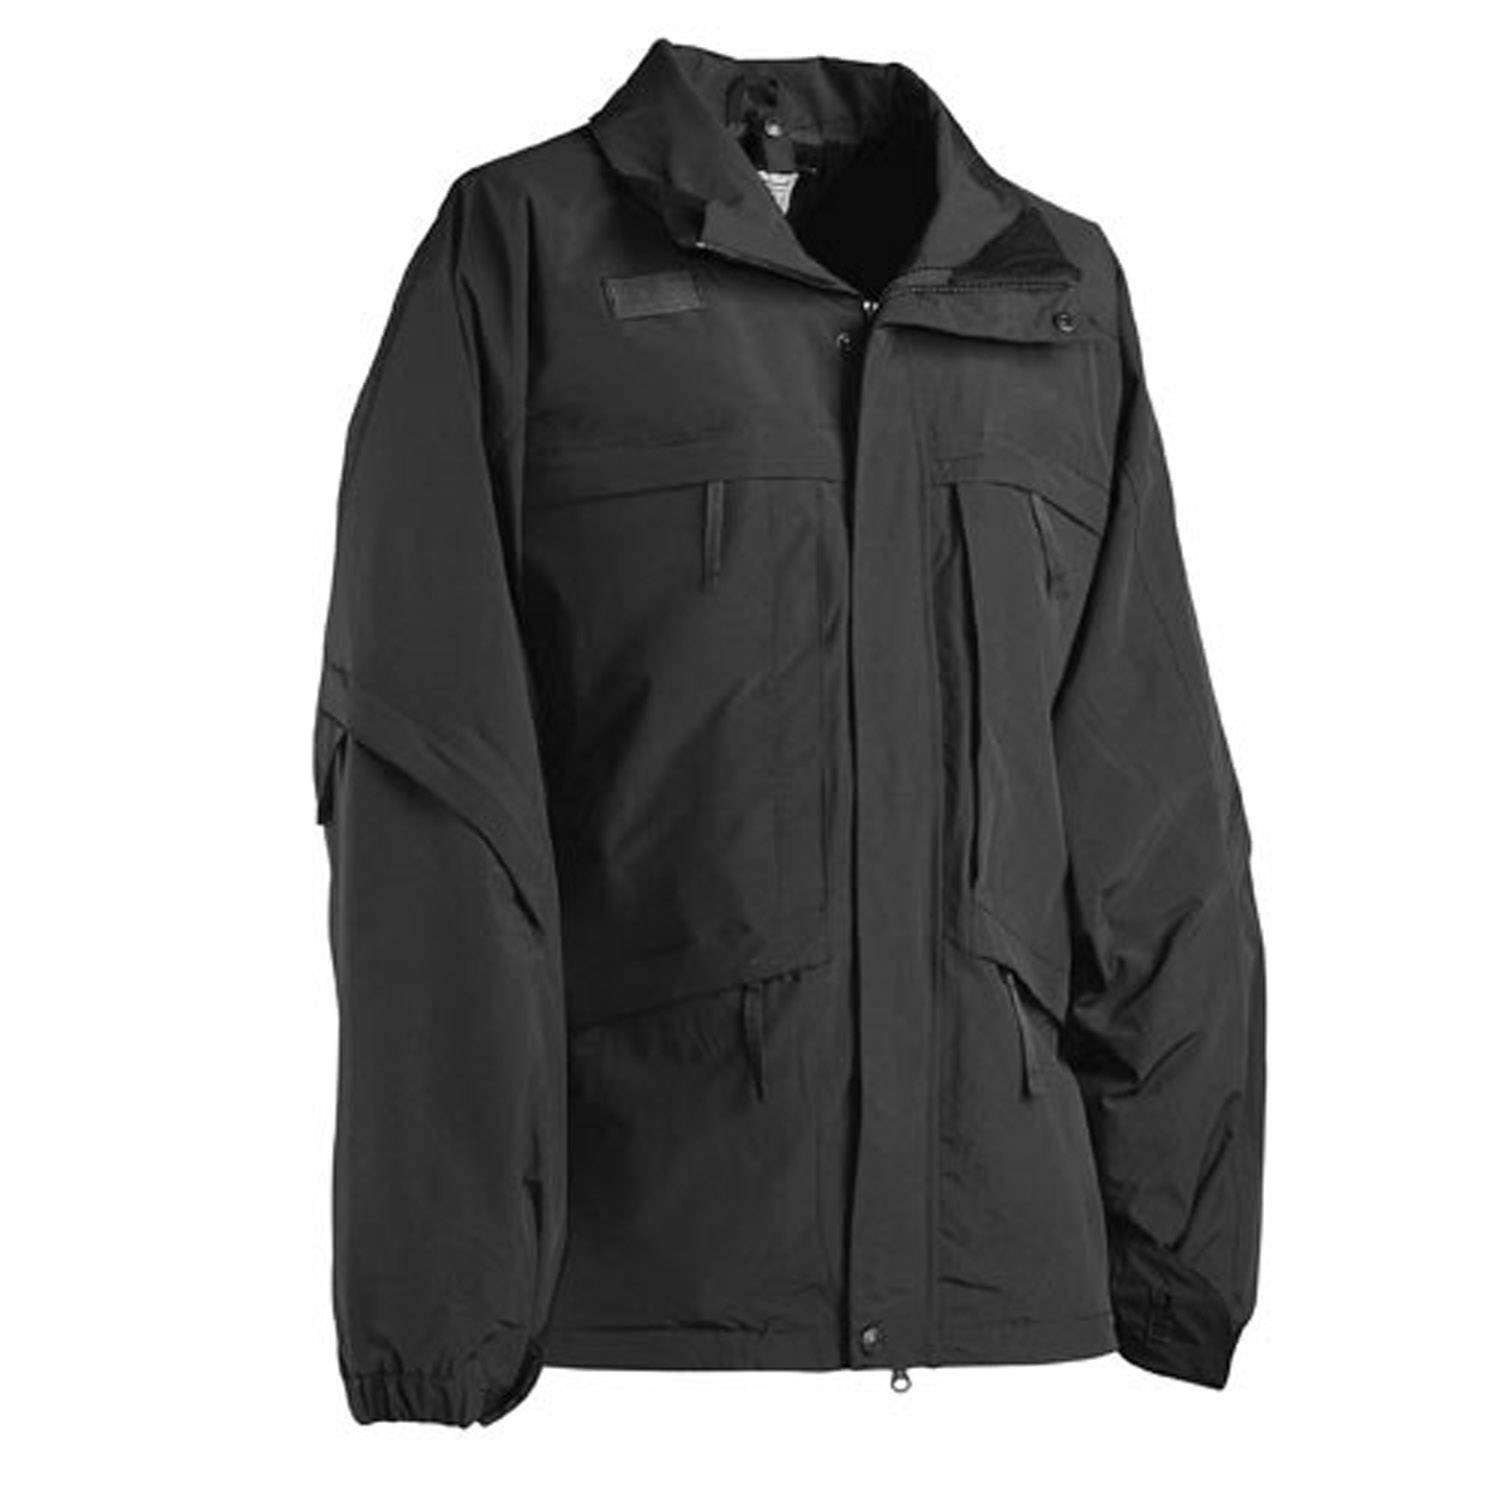 5.11 TACTICAL 3-IN-1 PARKA